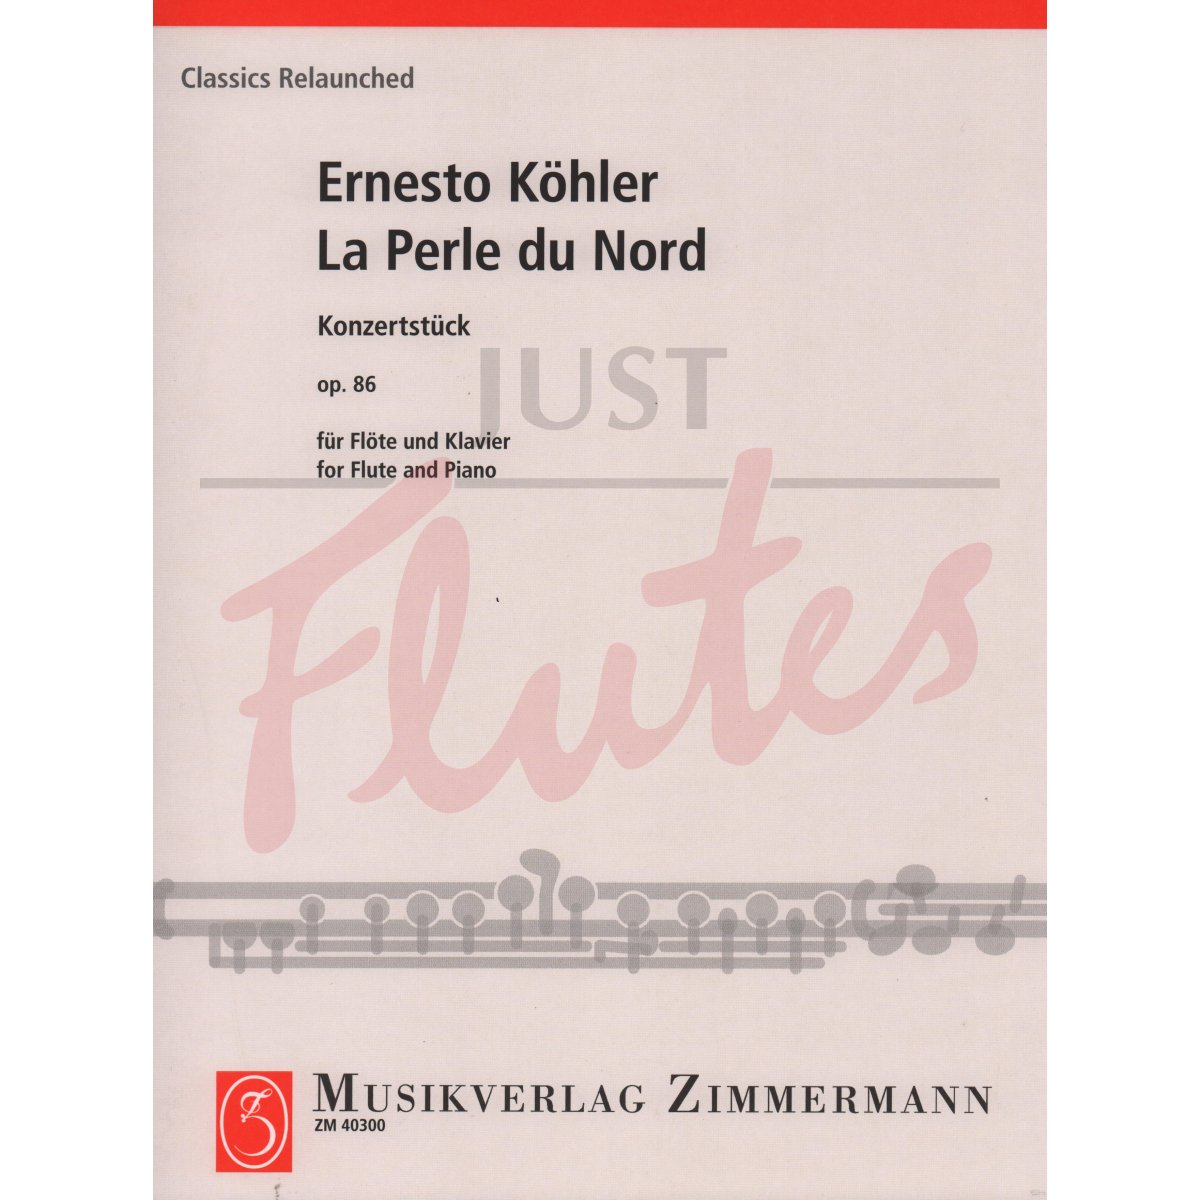 La Perle du Nord for Flute and Piano